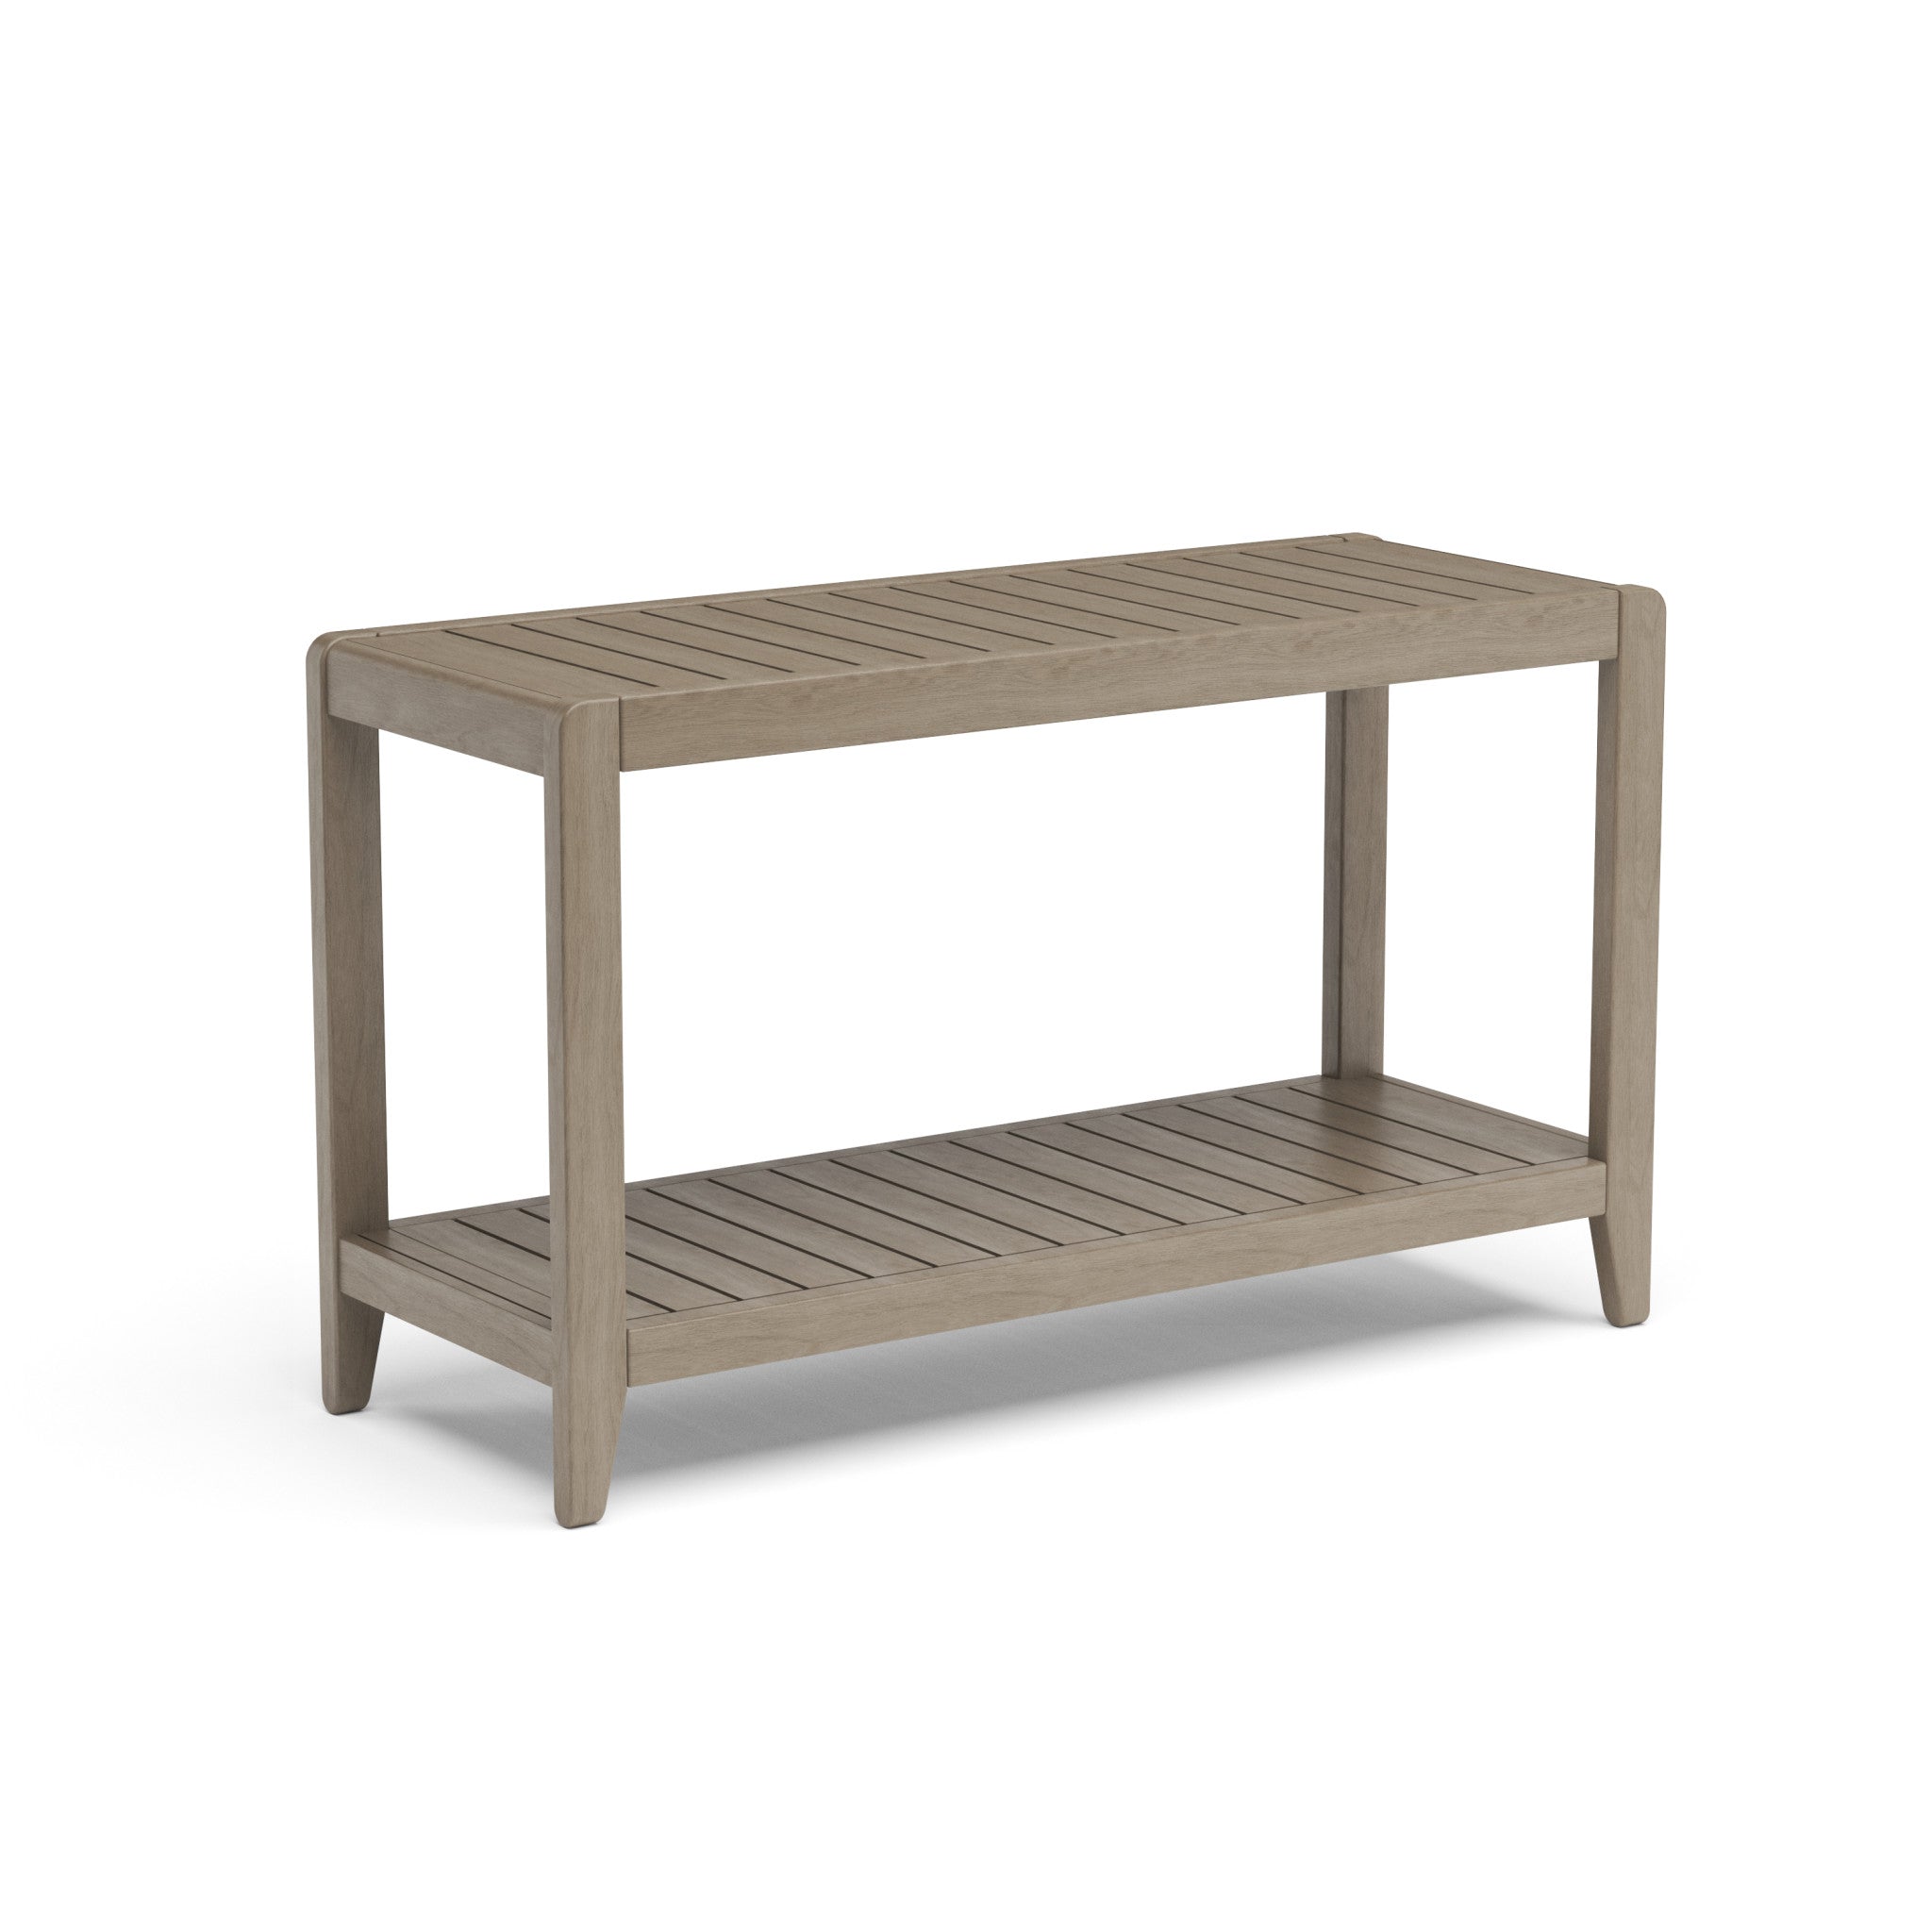 Sustain Outdoor Sofa Table by Homestyles - Gray - Wood - 5675-22